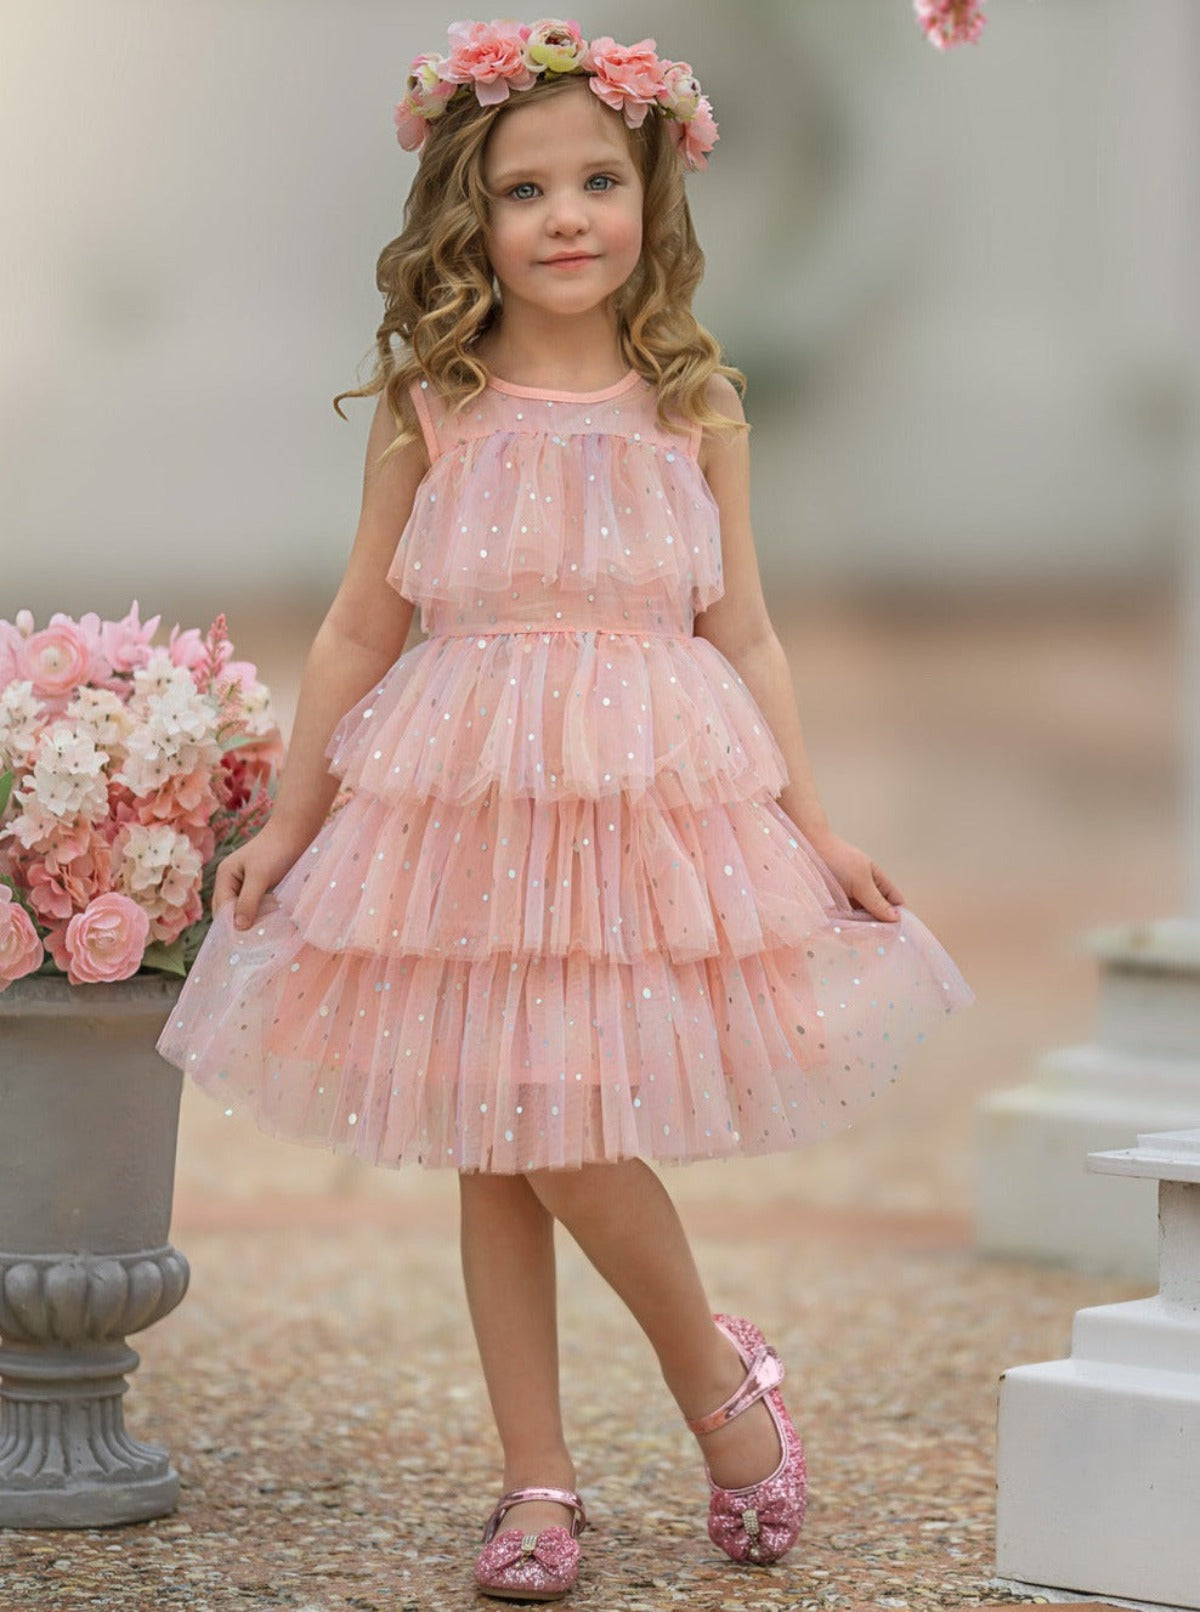 Mia Belle Girls Sequined Tiered Tulle Dress | Girls Spring Dresses